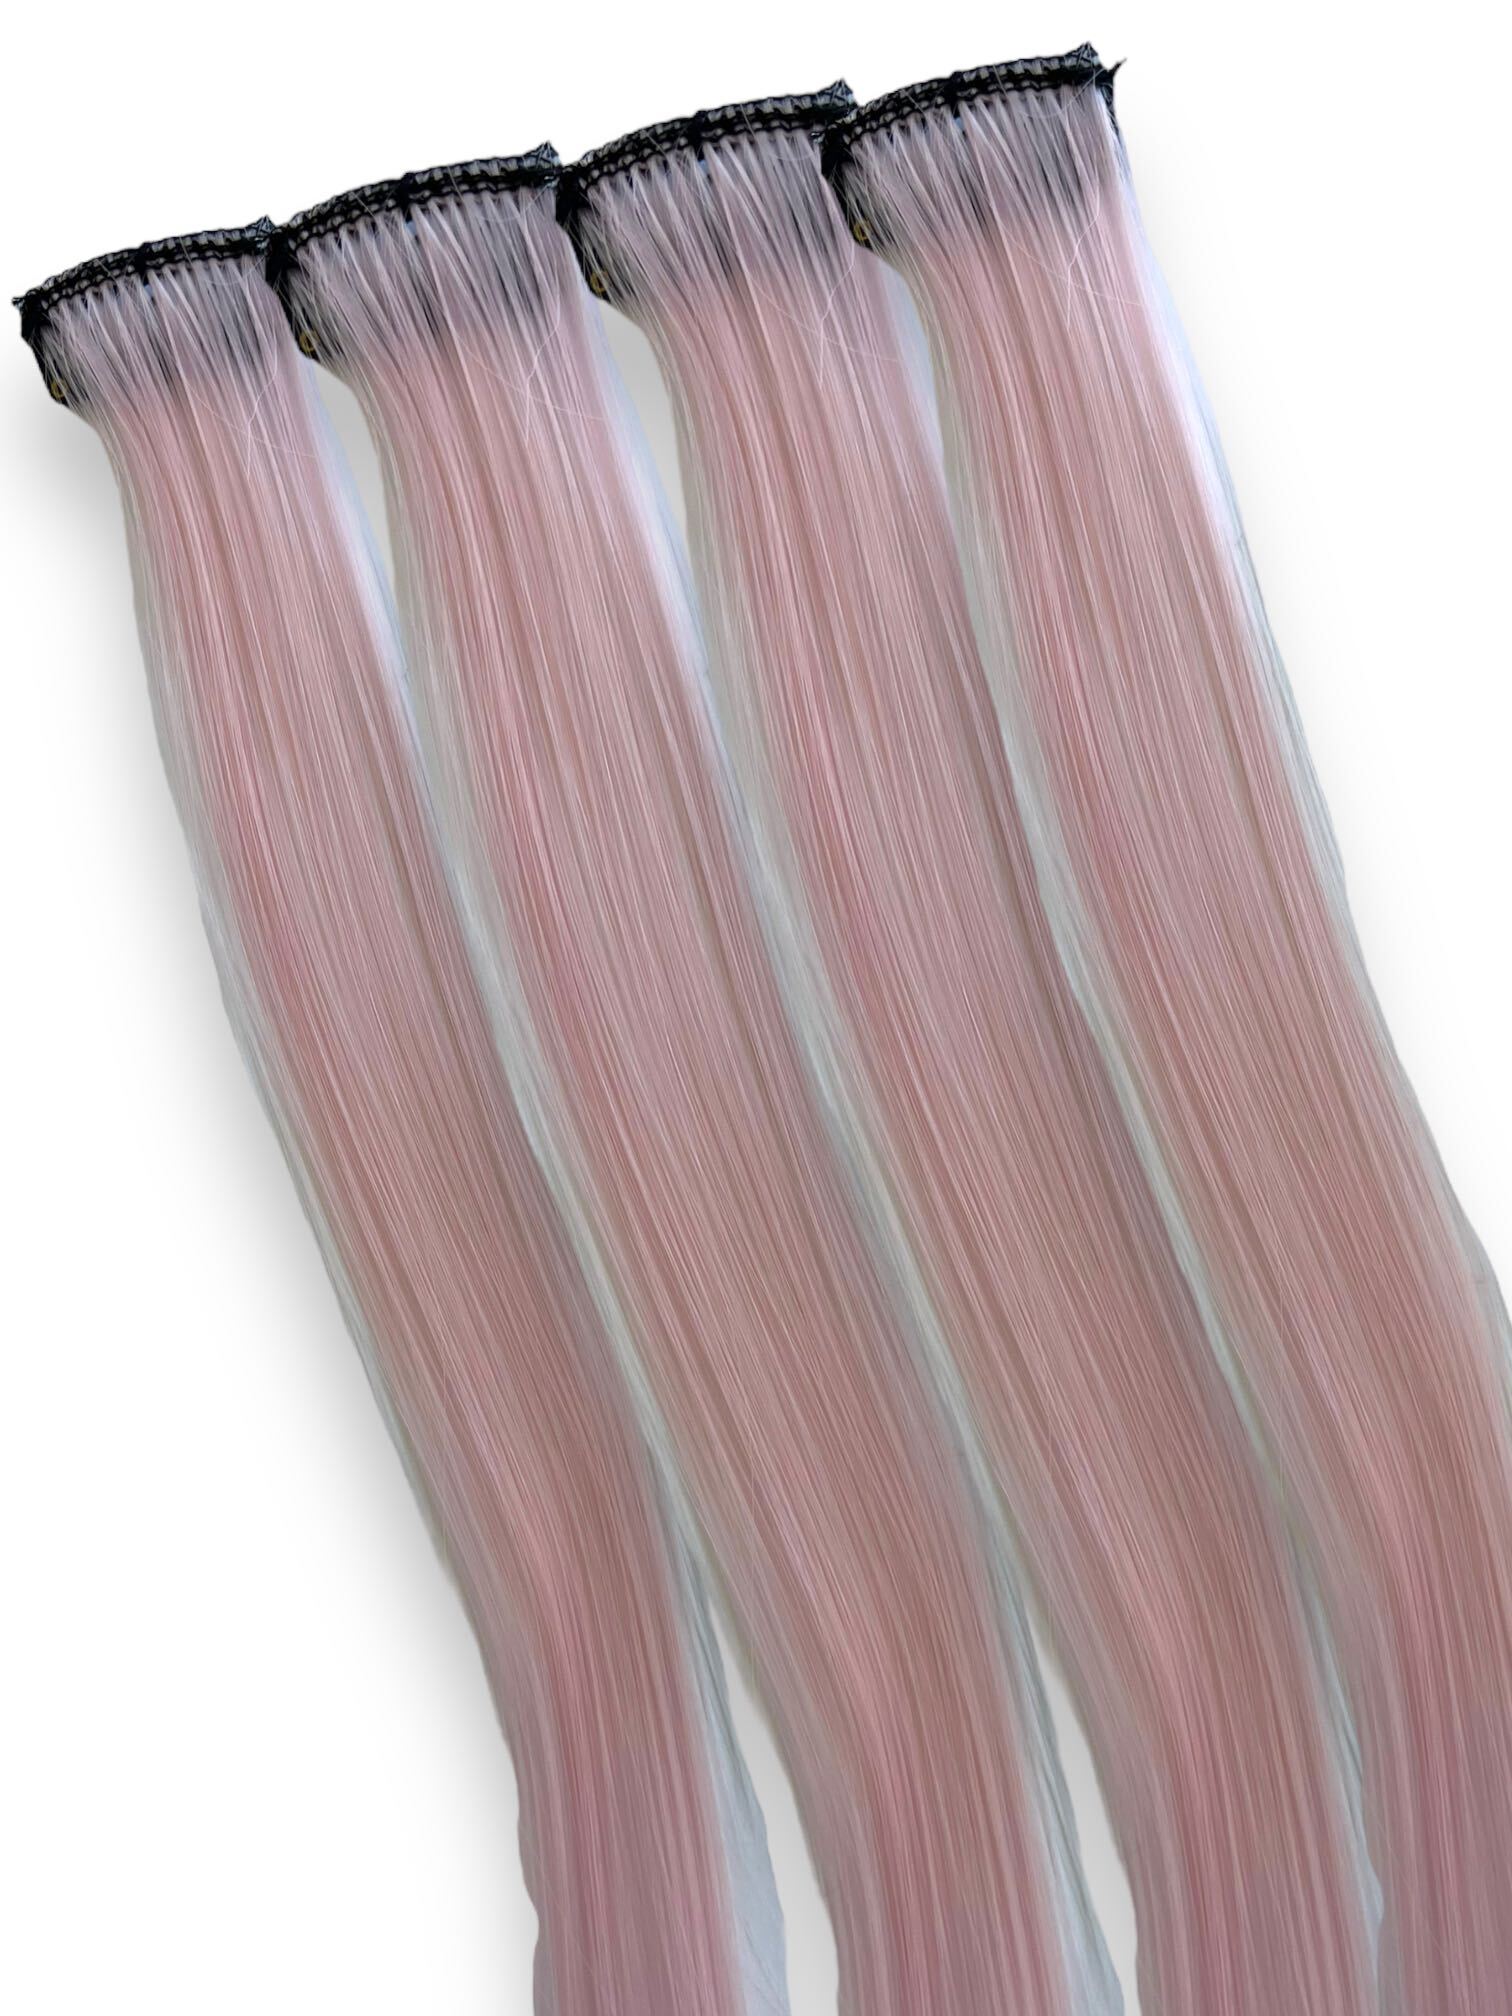 Stay In Your Lane - Pastel Pink Hair Clip-Ins